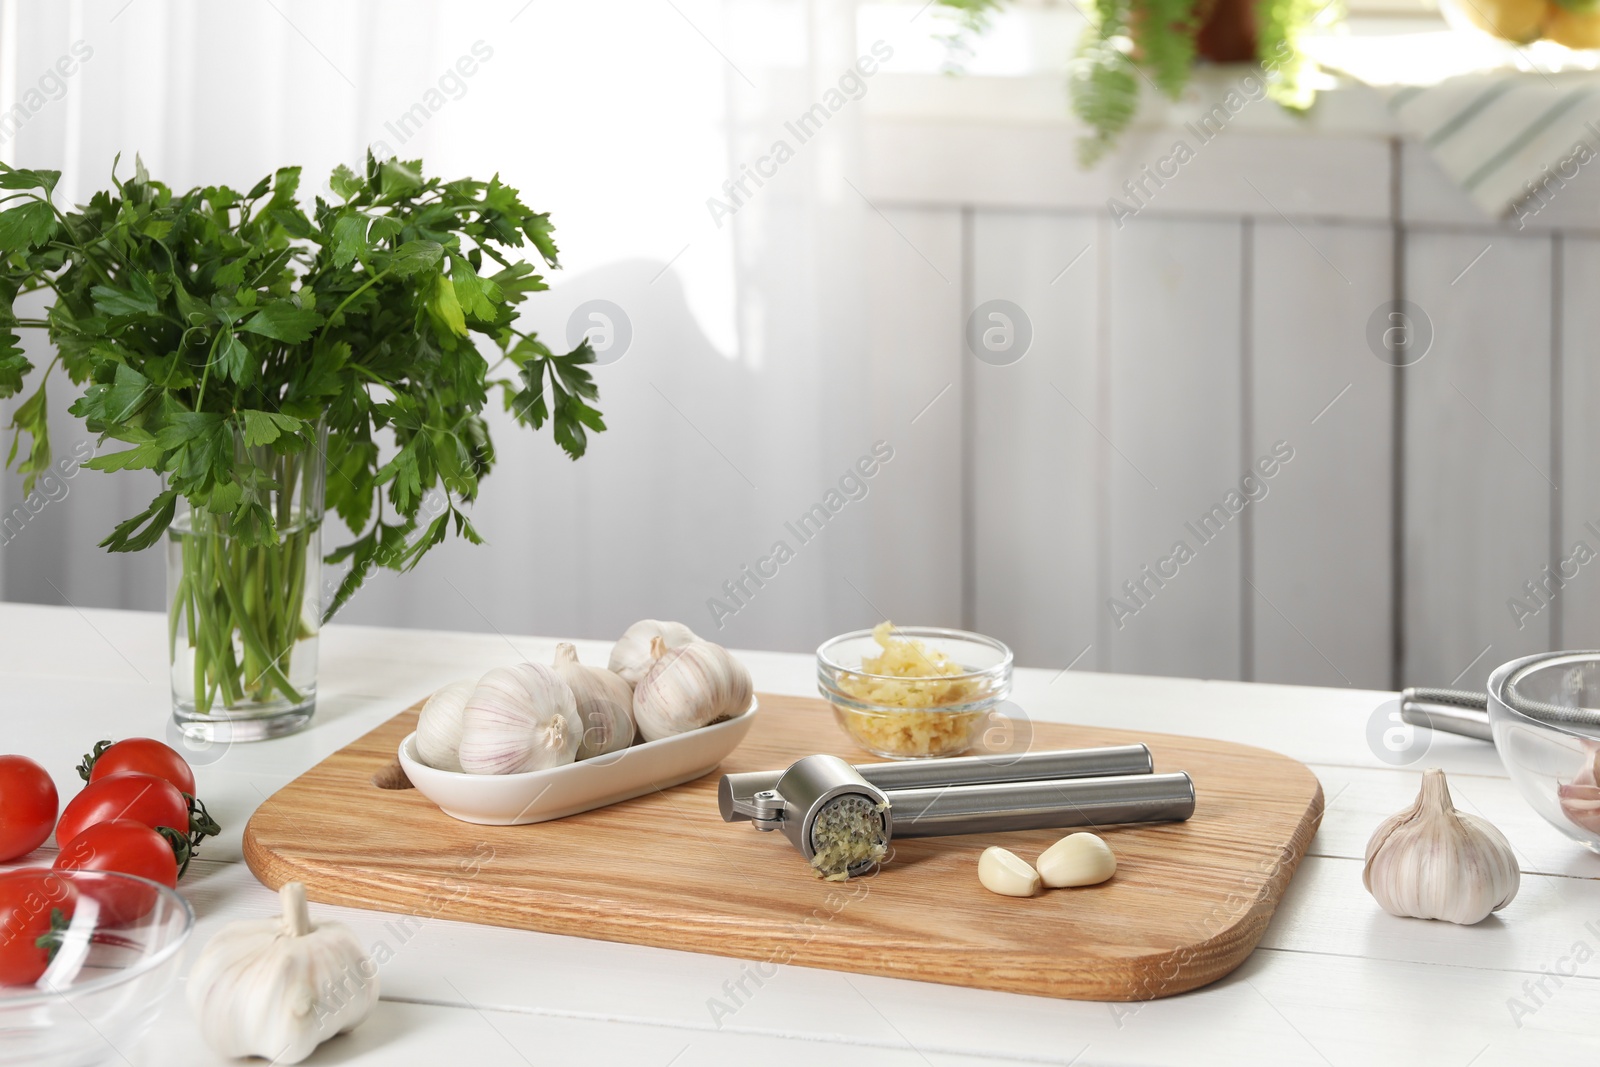 Photo of Garlic press and products on wooden table in kitchen